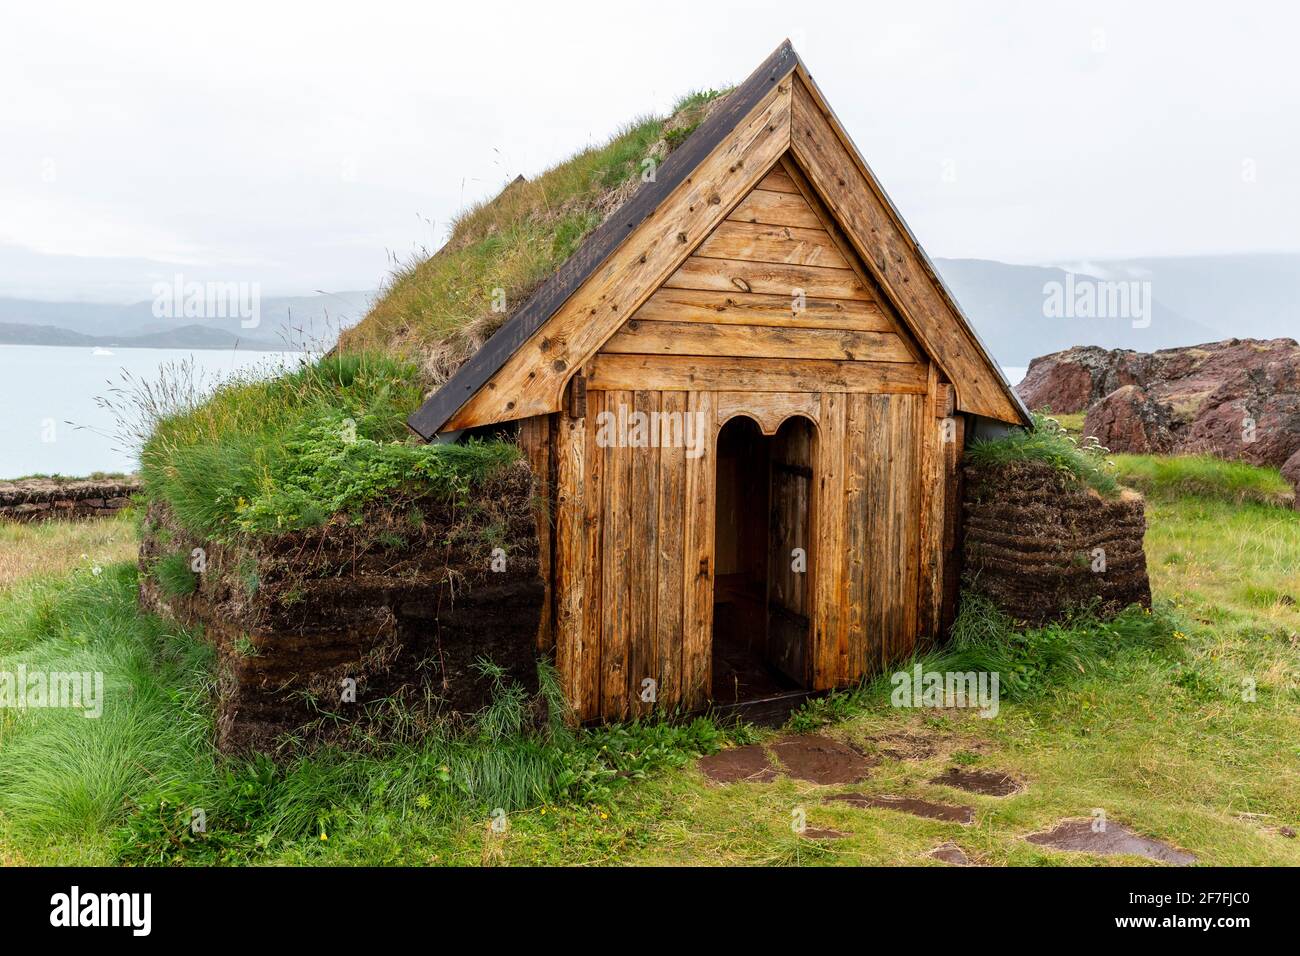 Norse chapel at the reconstruction of Erik the Red's Norse settlement at Brattahlid, southwestern Greenland, Polar Regions Stock Photo